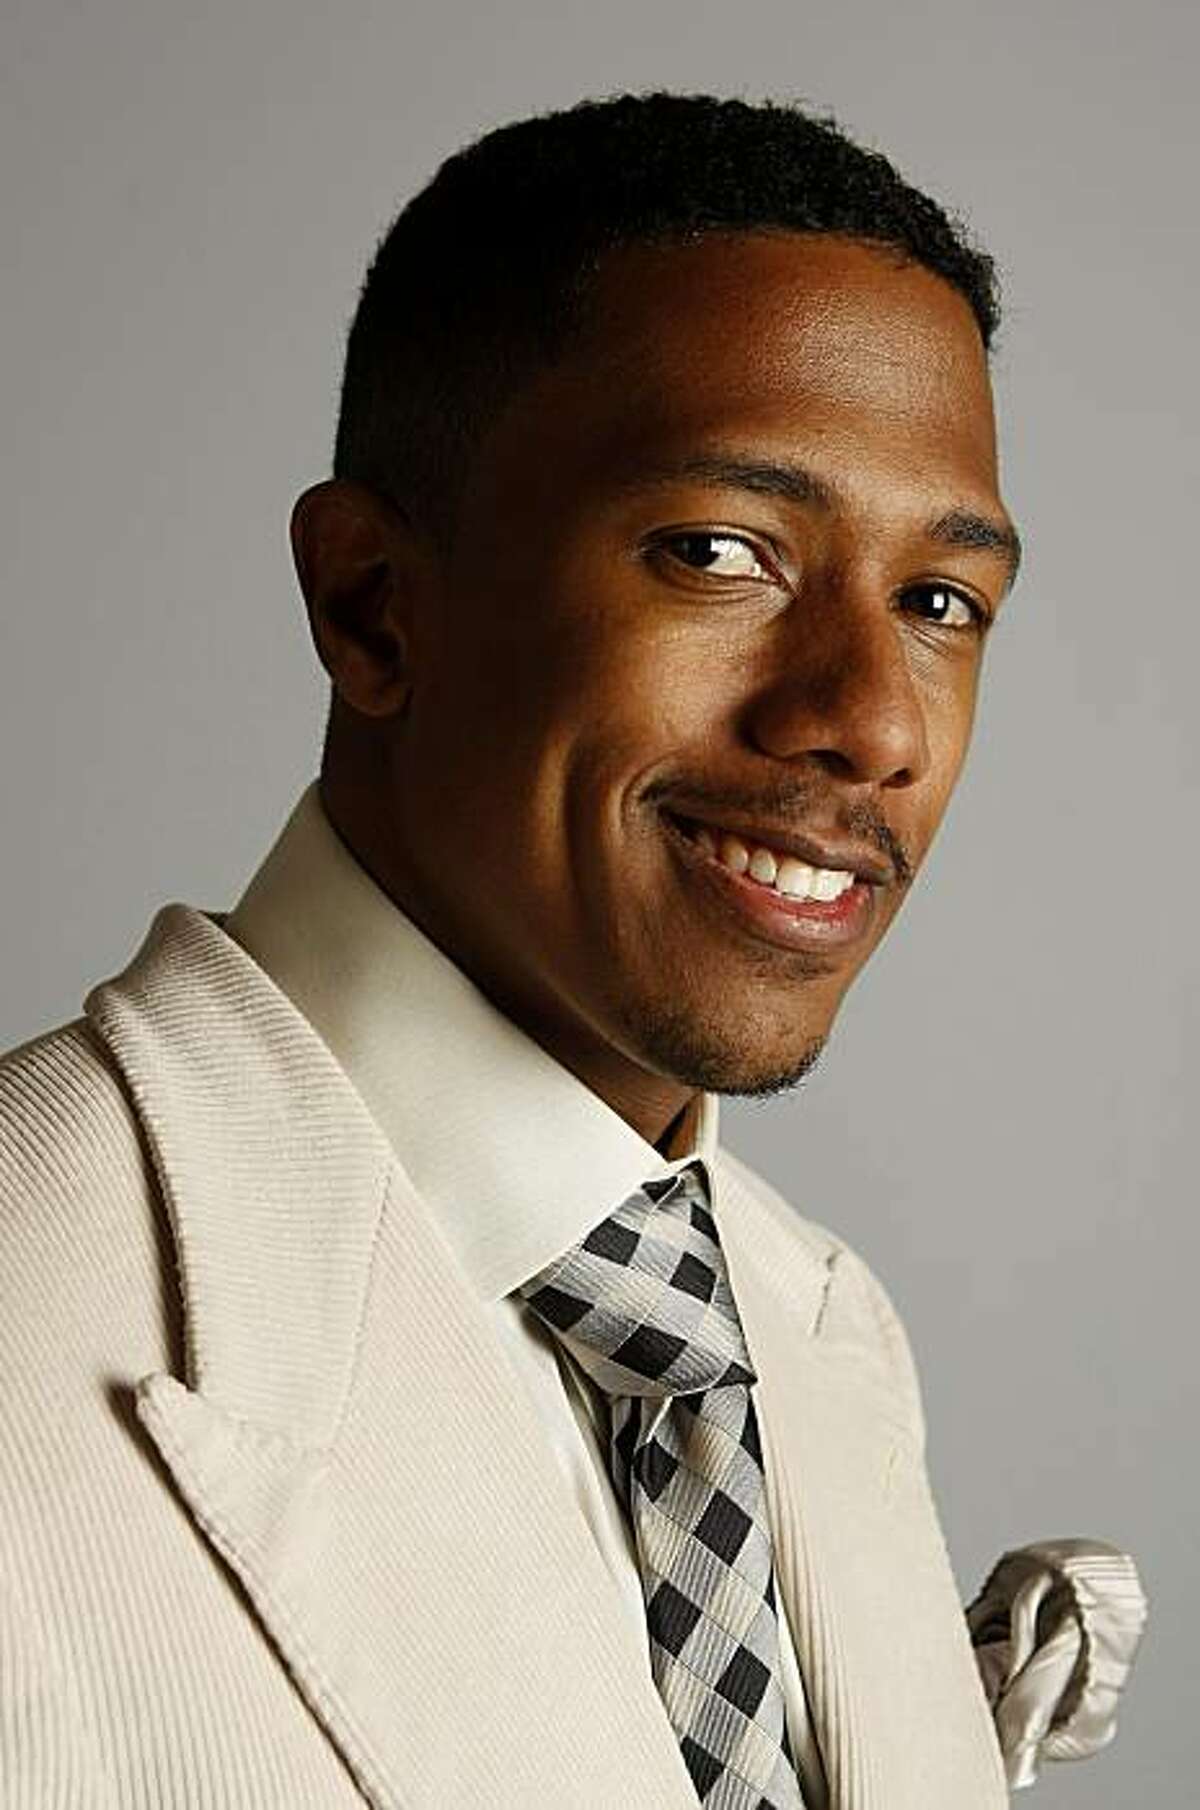 Nick Cannon : Nick Cannon Net Worth 2020 | Biography and lifestory ...